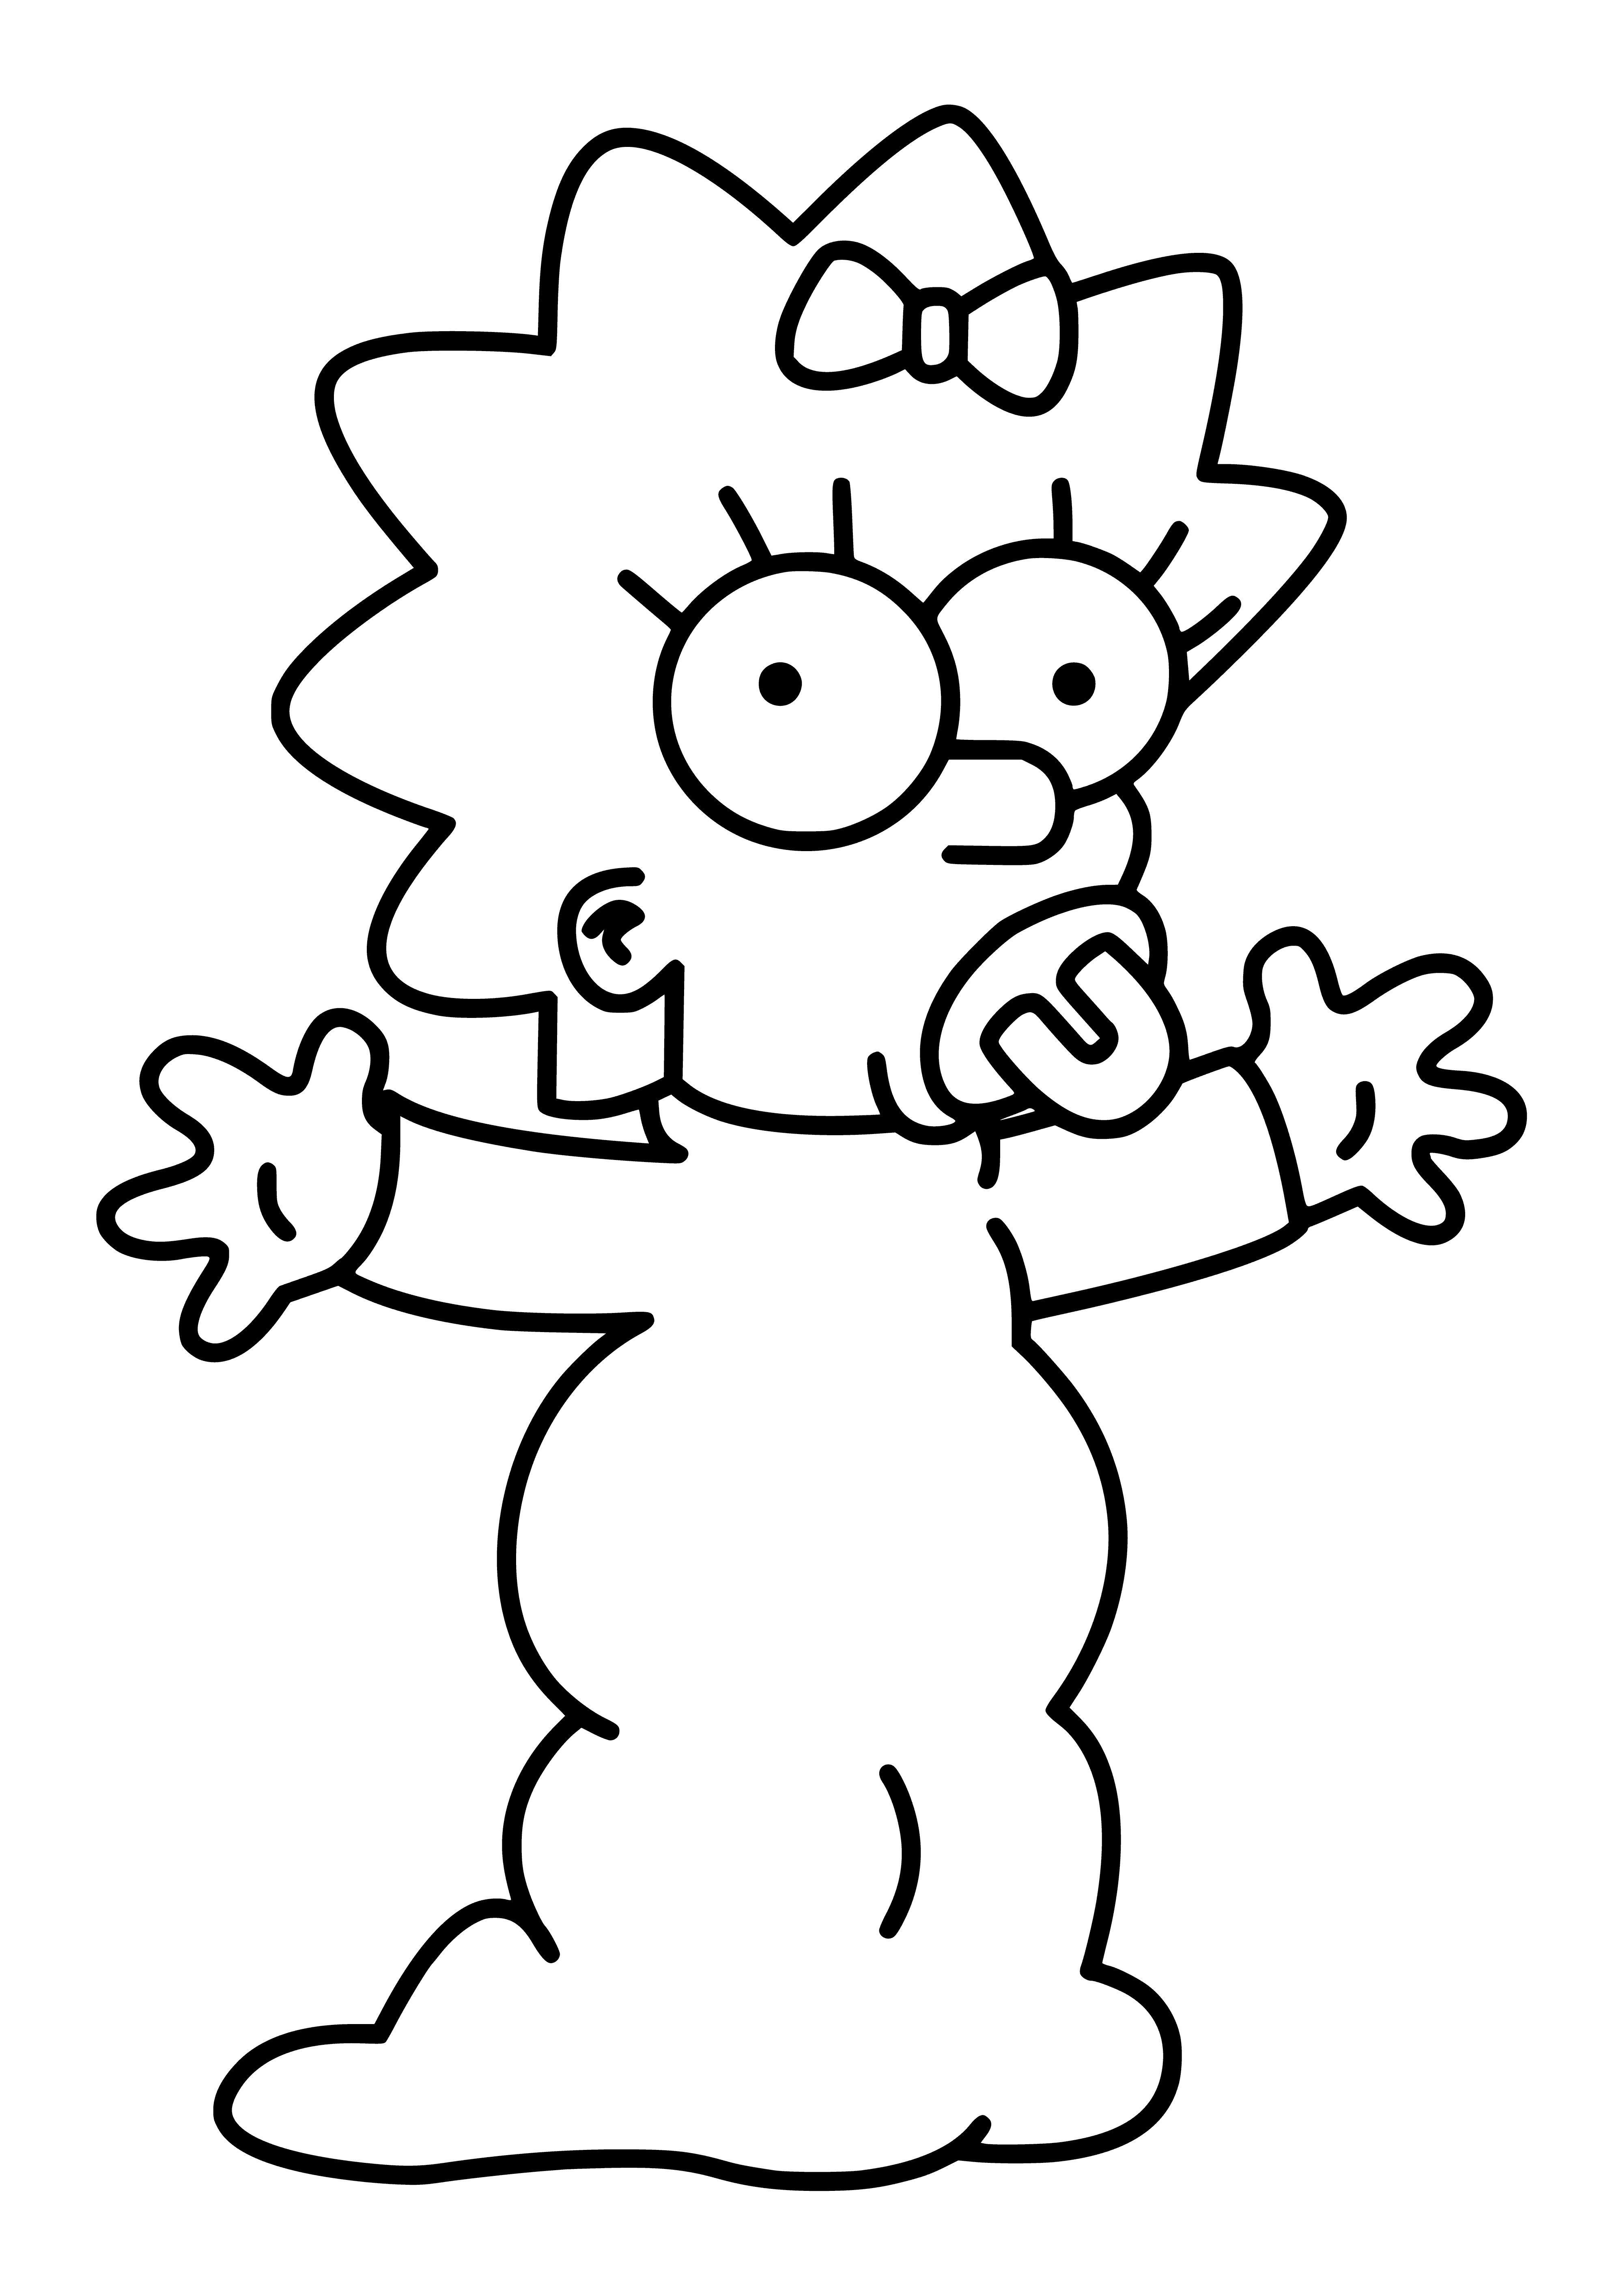 Maggie coloring page